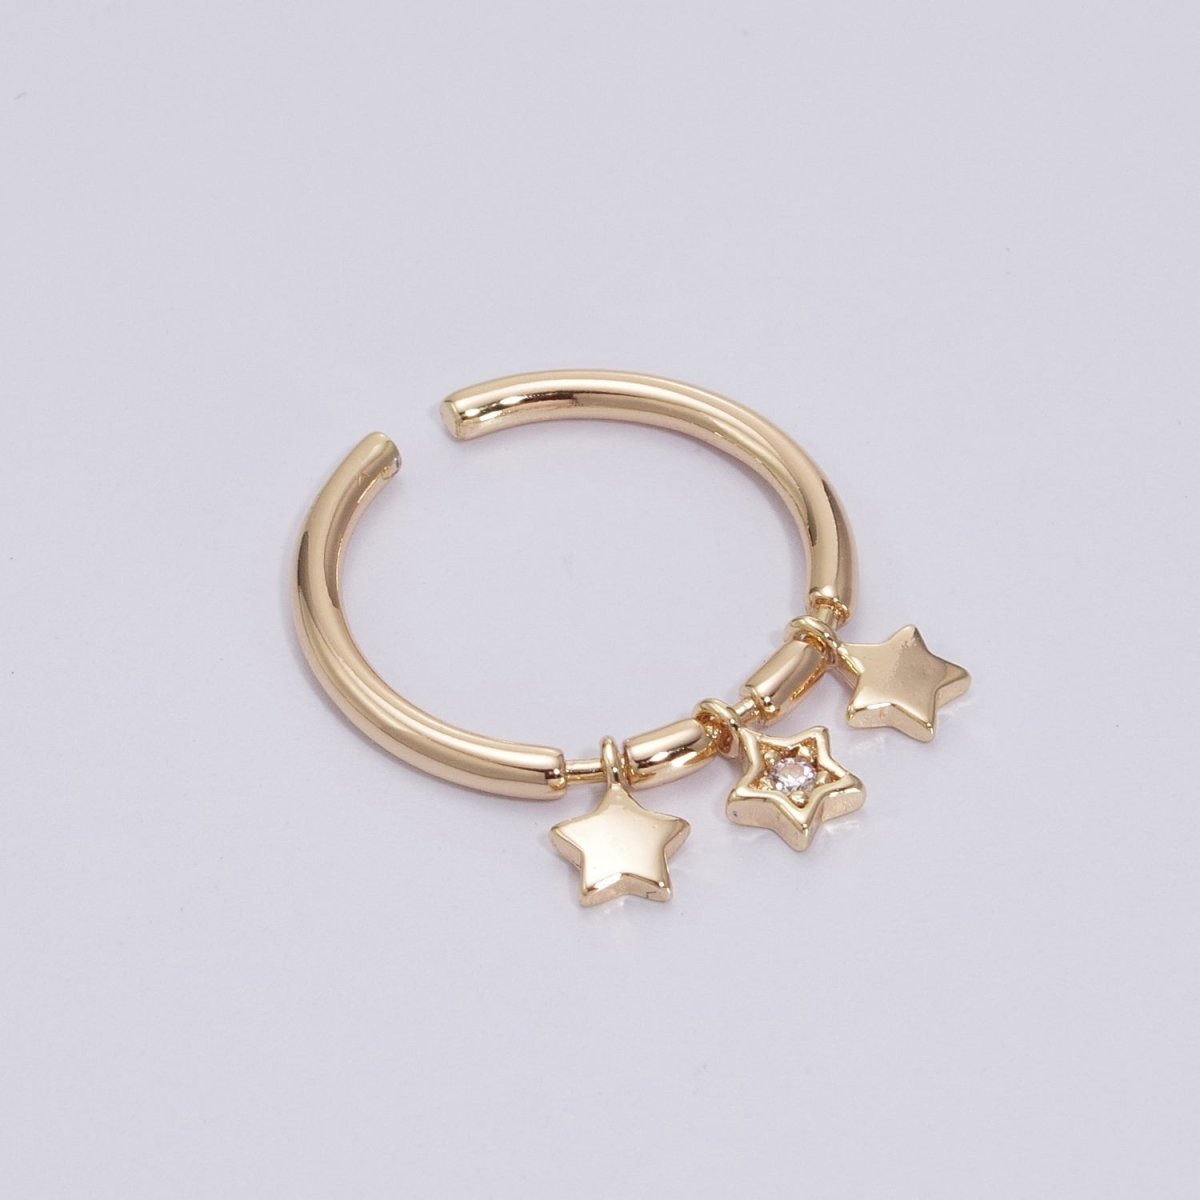 Twinkle Little Star Ring- Dainty Star Ring, 18K Gold Filled Ring, Dangly Star Stacking Ring Charm U-098 - DLUXCA